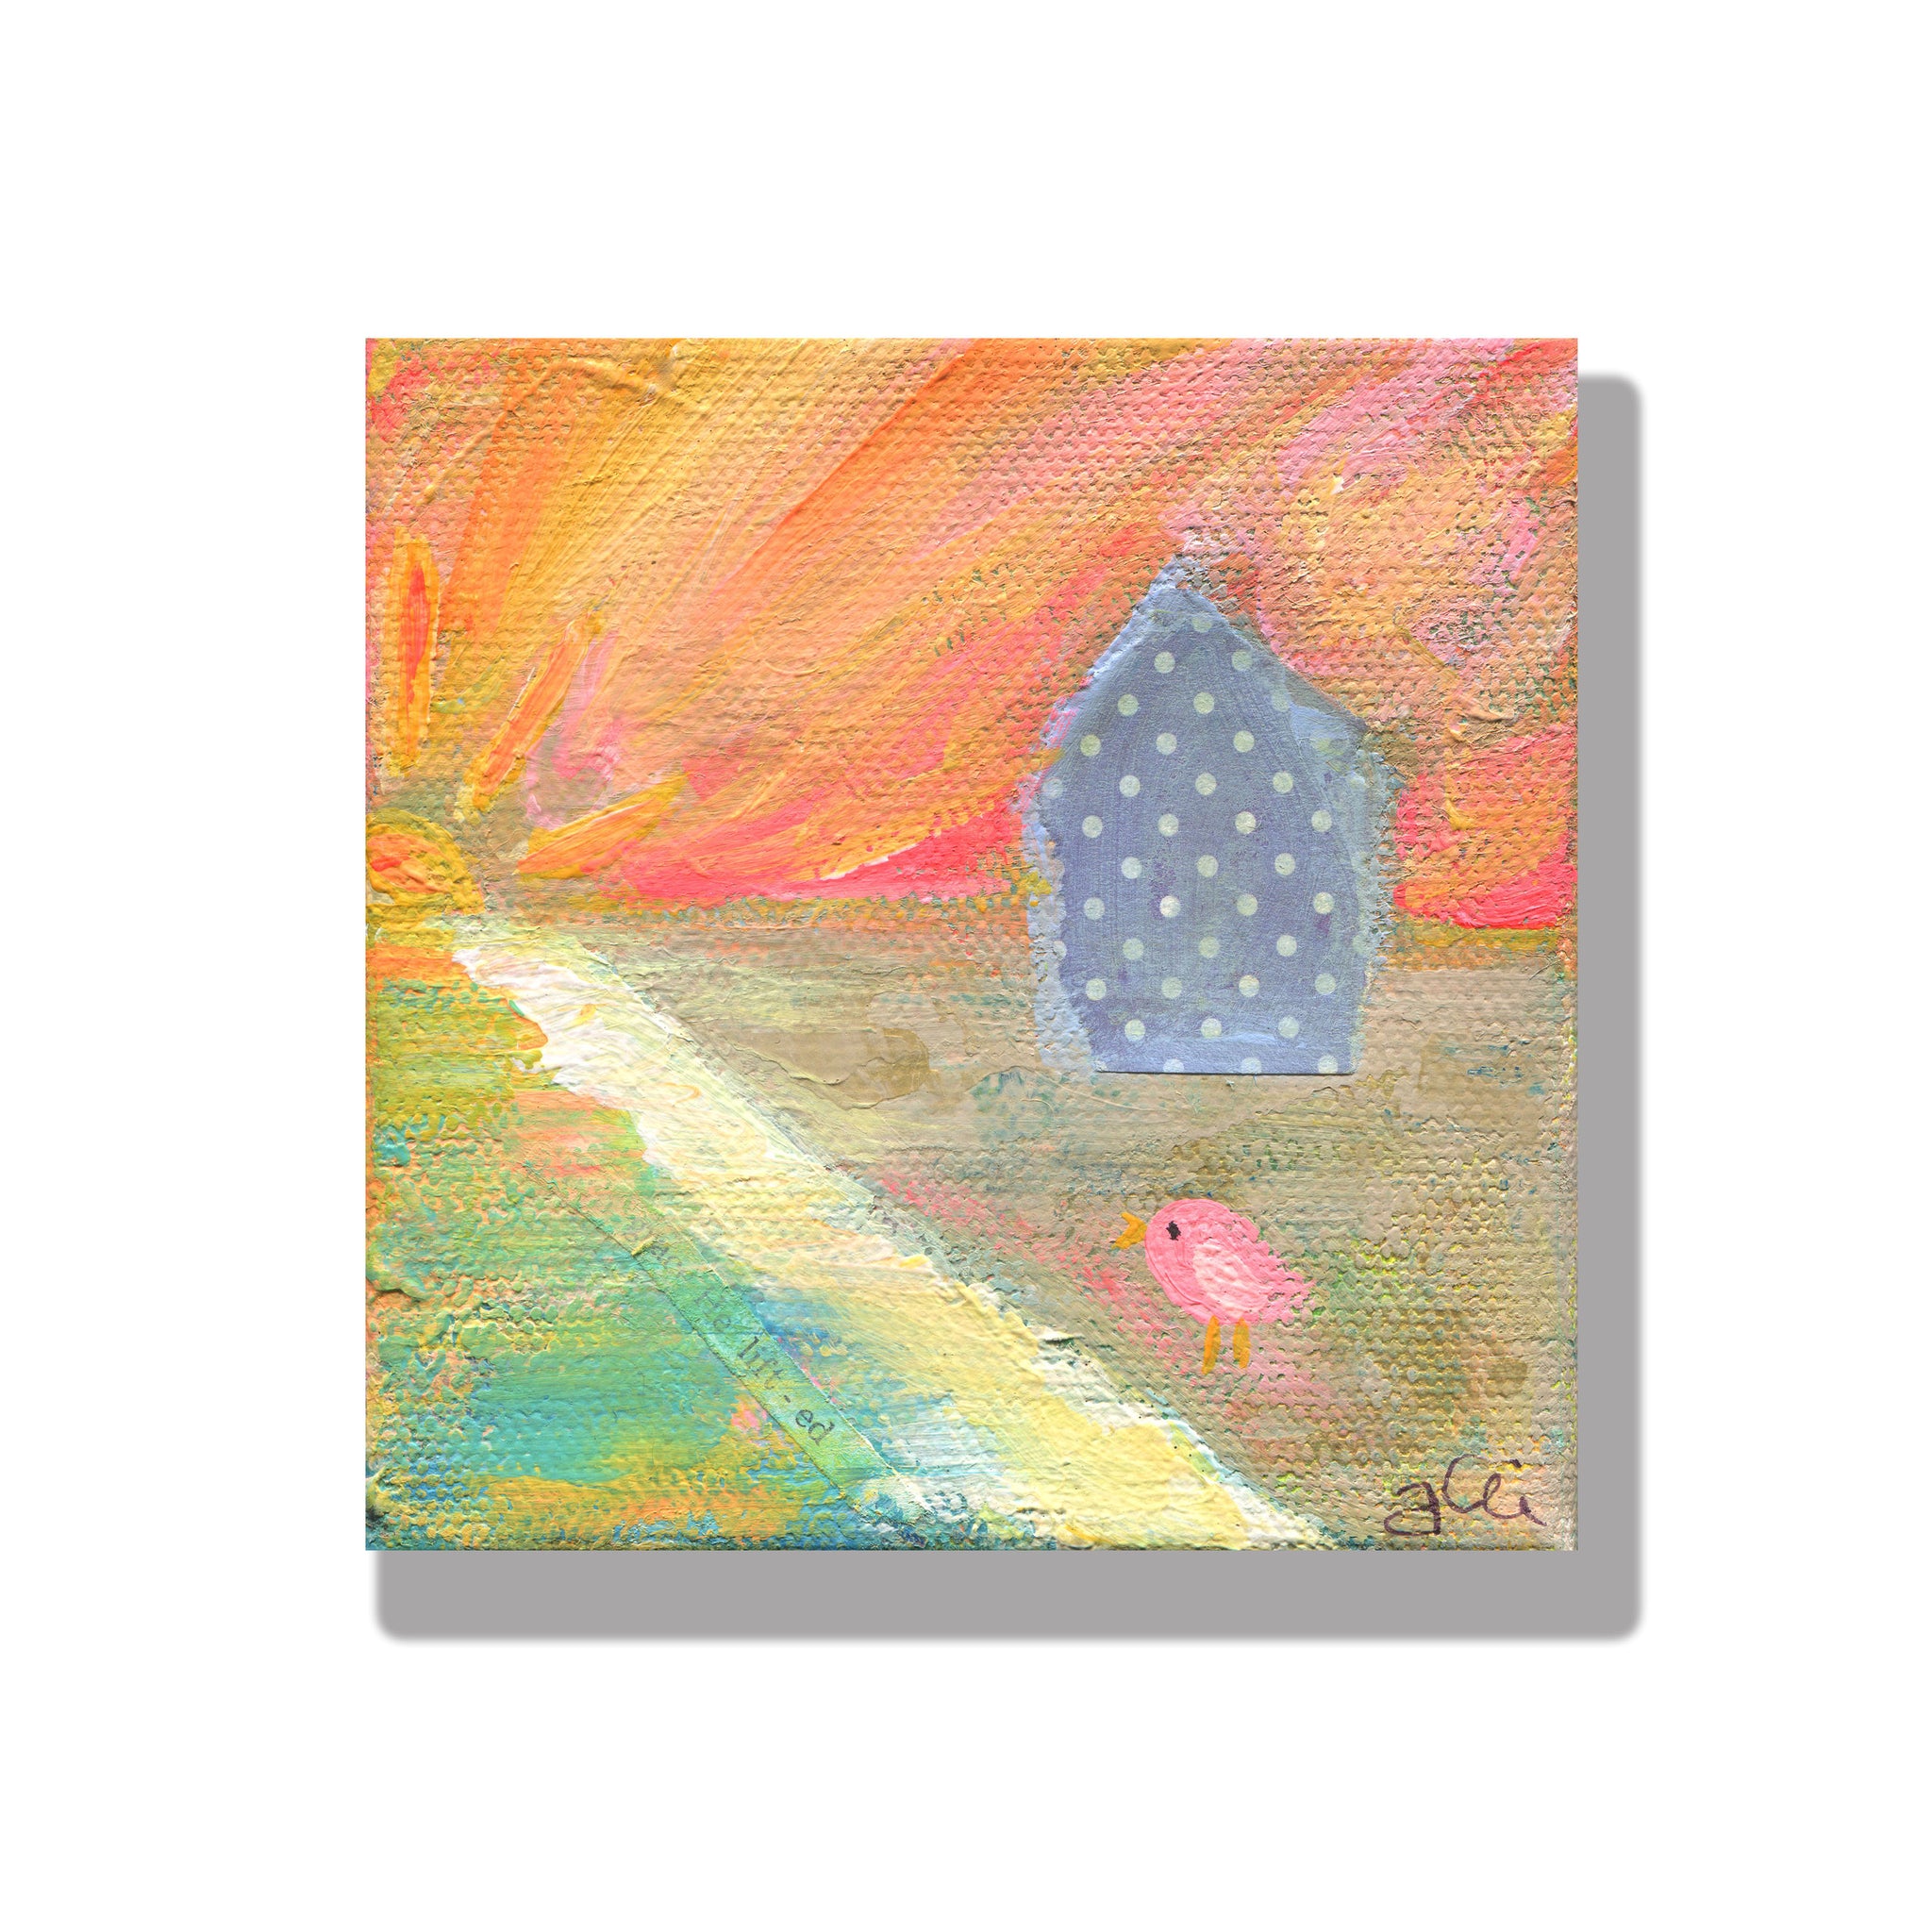 "Purple Paradise" -  Abstract Sunset Painting 4x4 inches